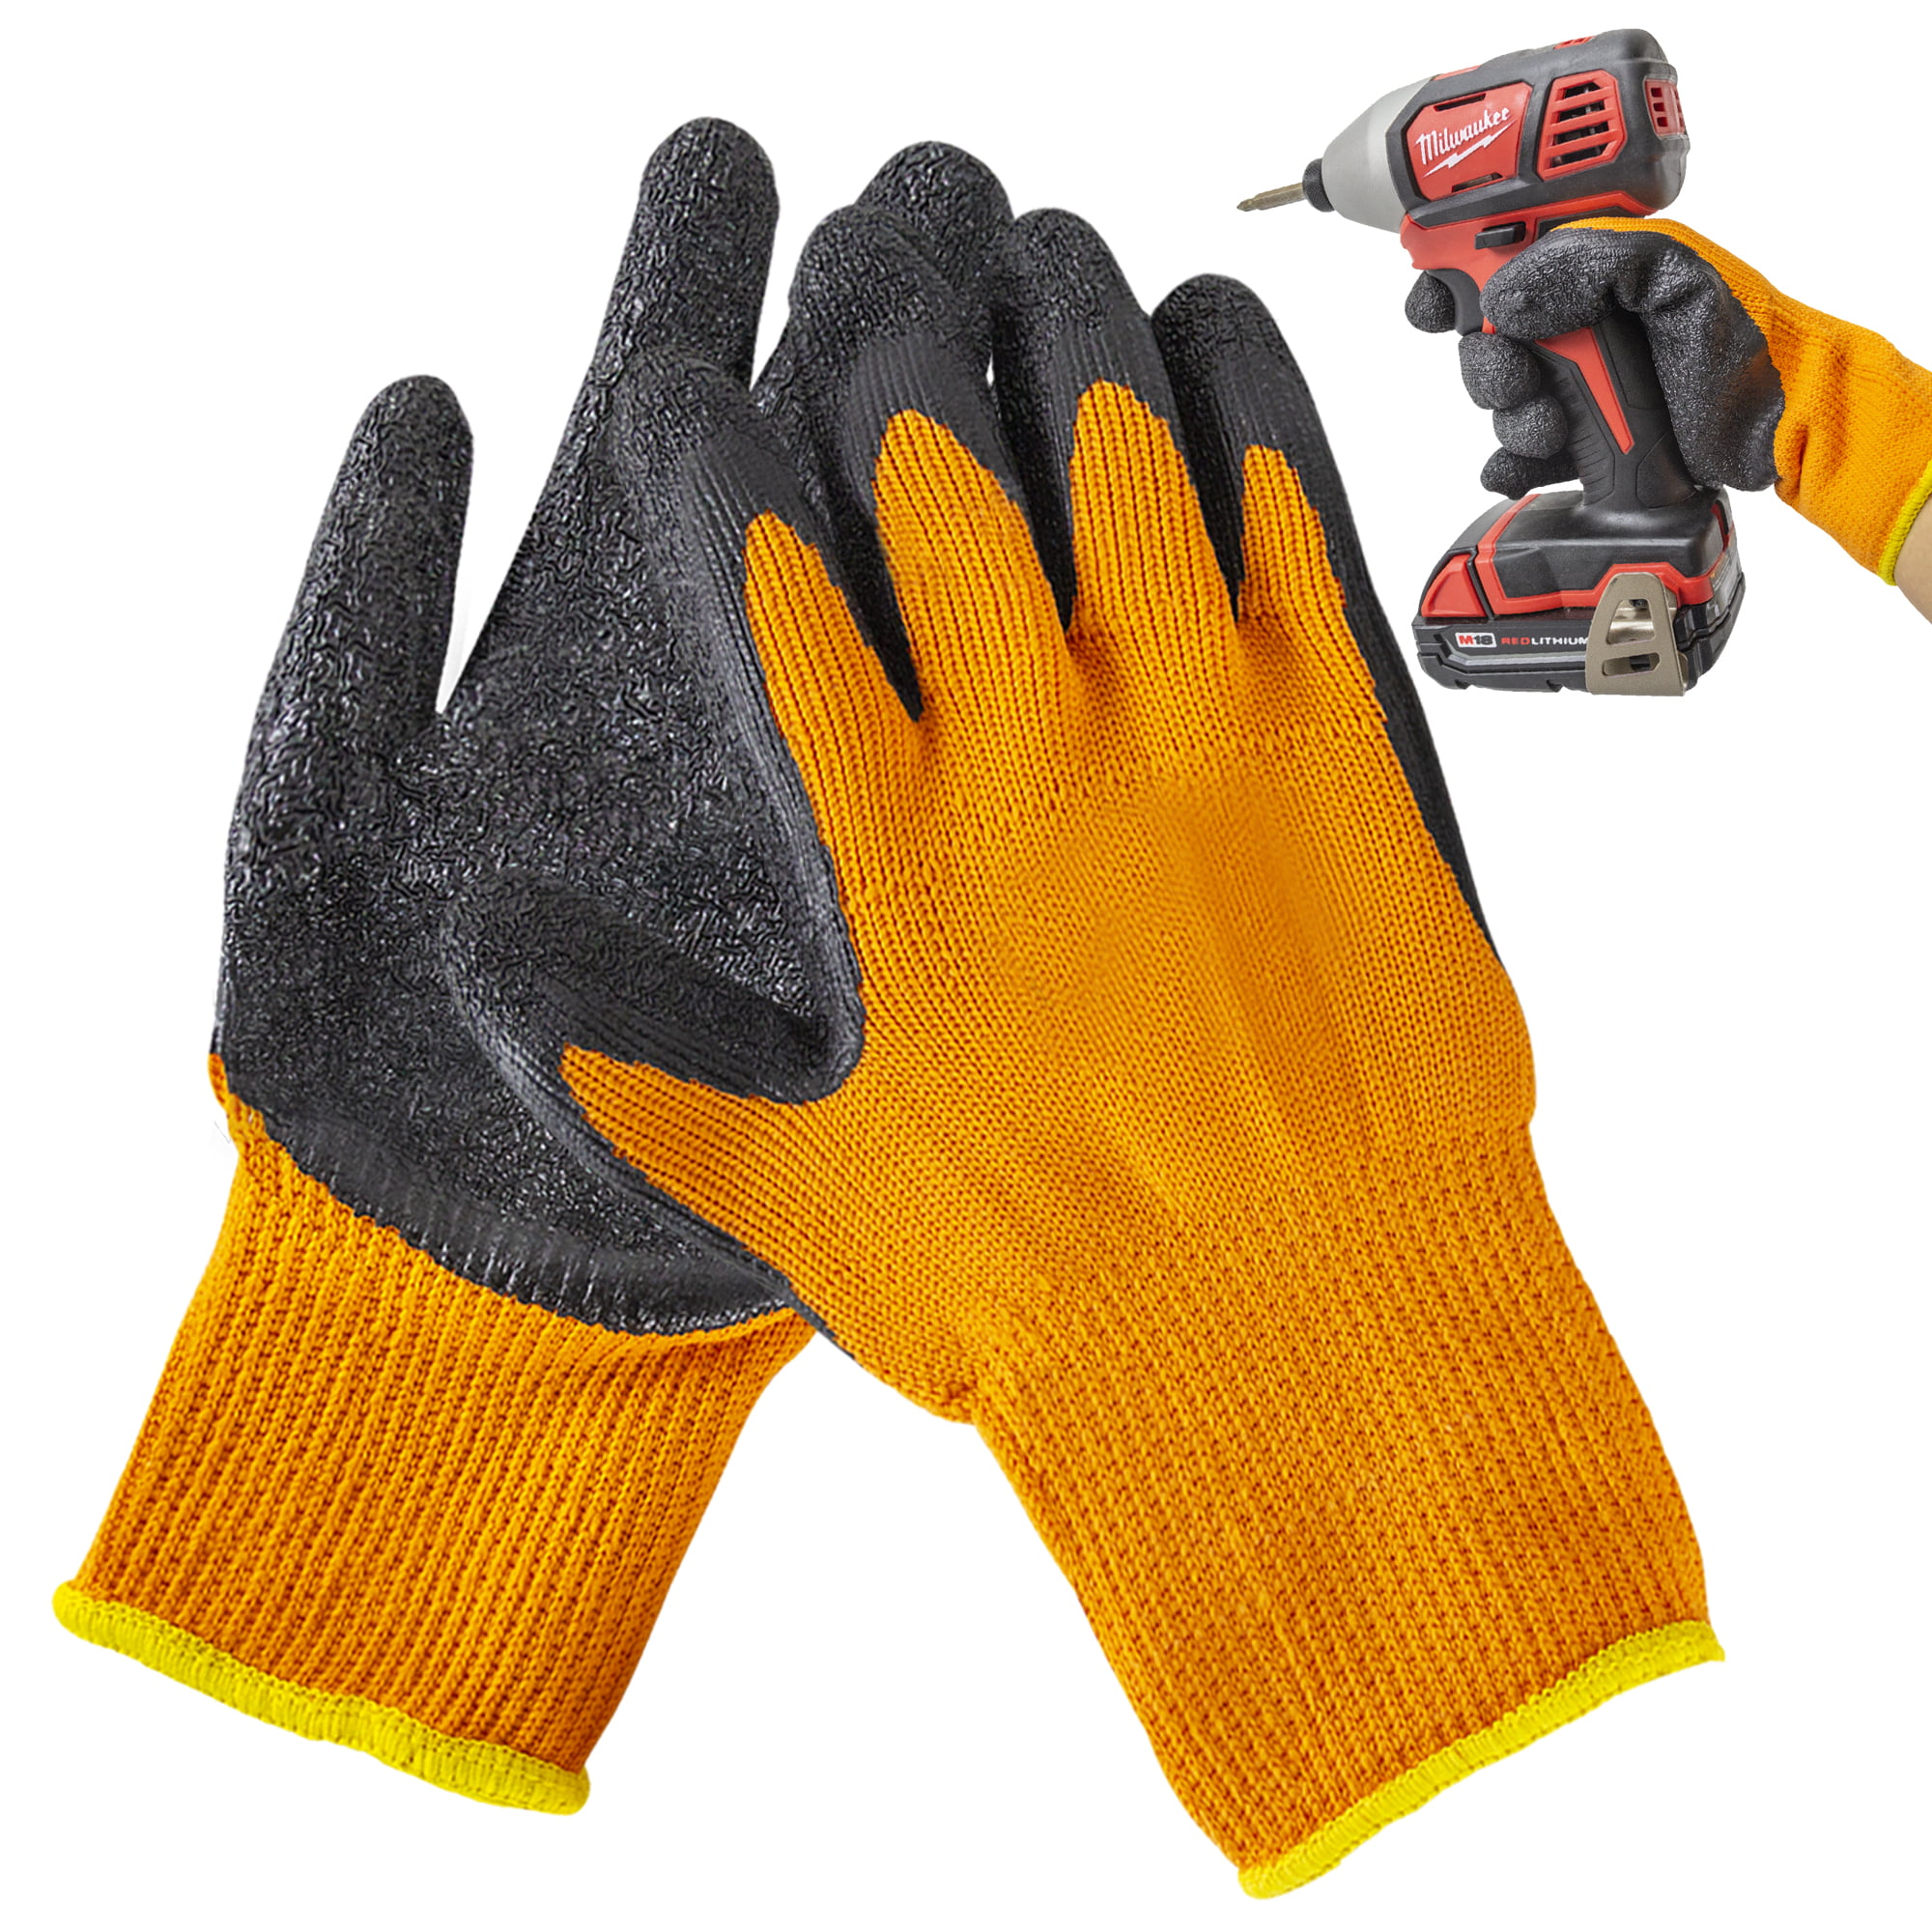 EXTRA LARGE SAFETY WORK GLOVES Hands Protection Weather Outdoor Latex Non Slip 